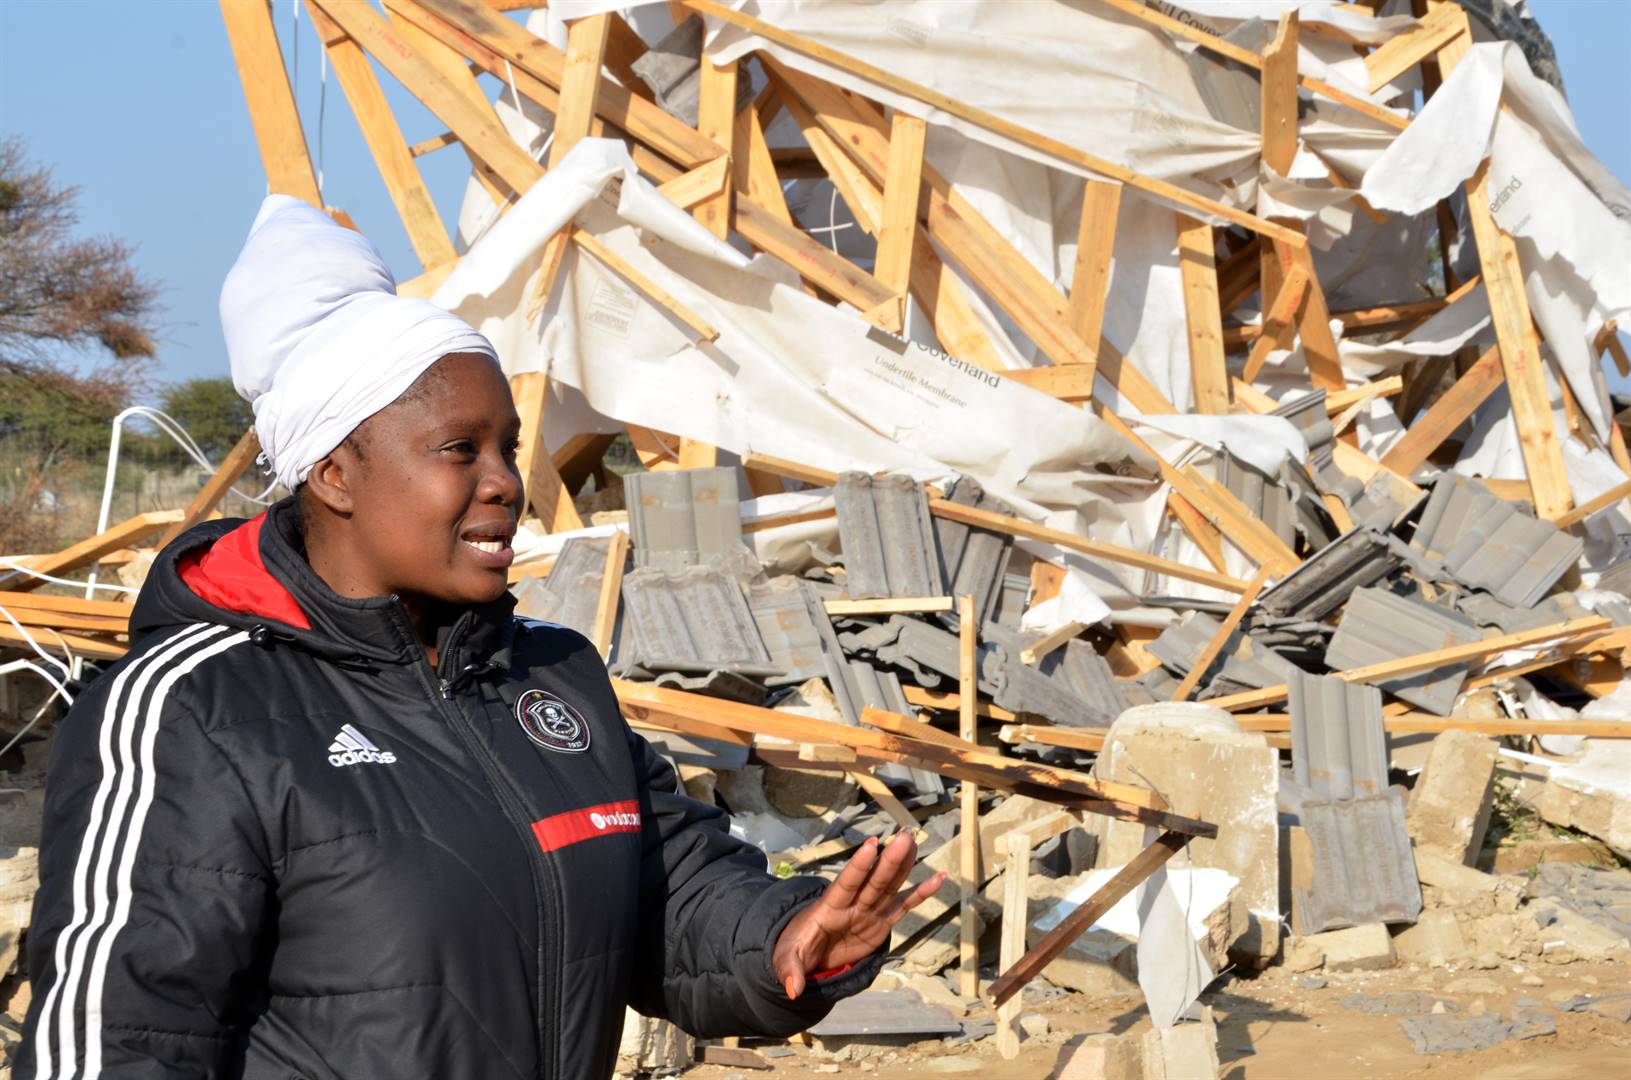 Dineo Ratsie from Mahobieskraal said it was painful to see her home being demolished and her property being destroyed. Photo by Rapula Mancai